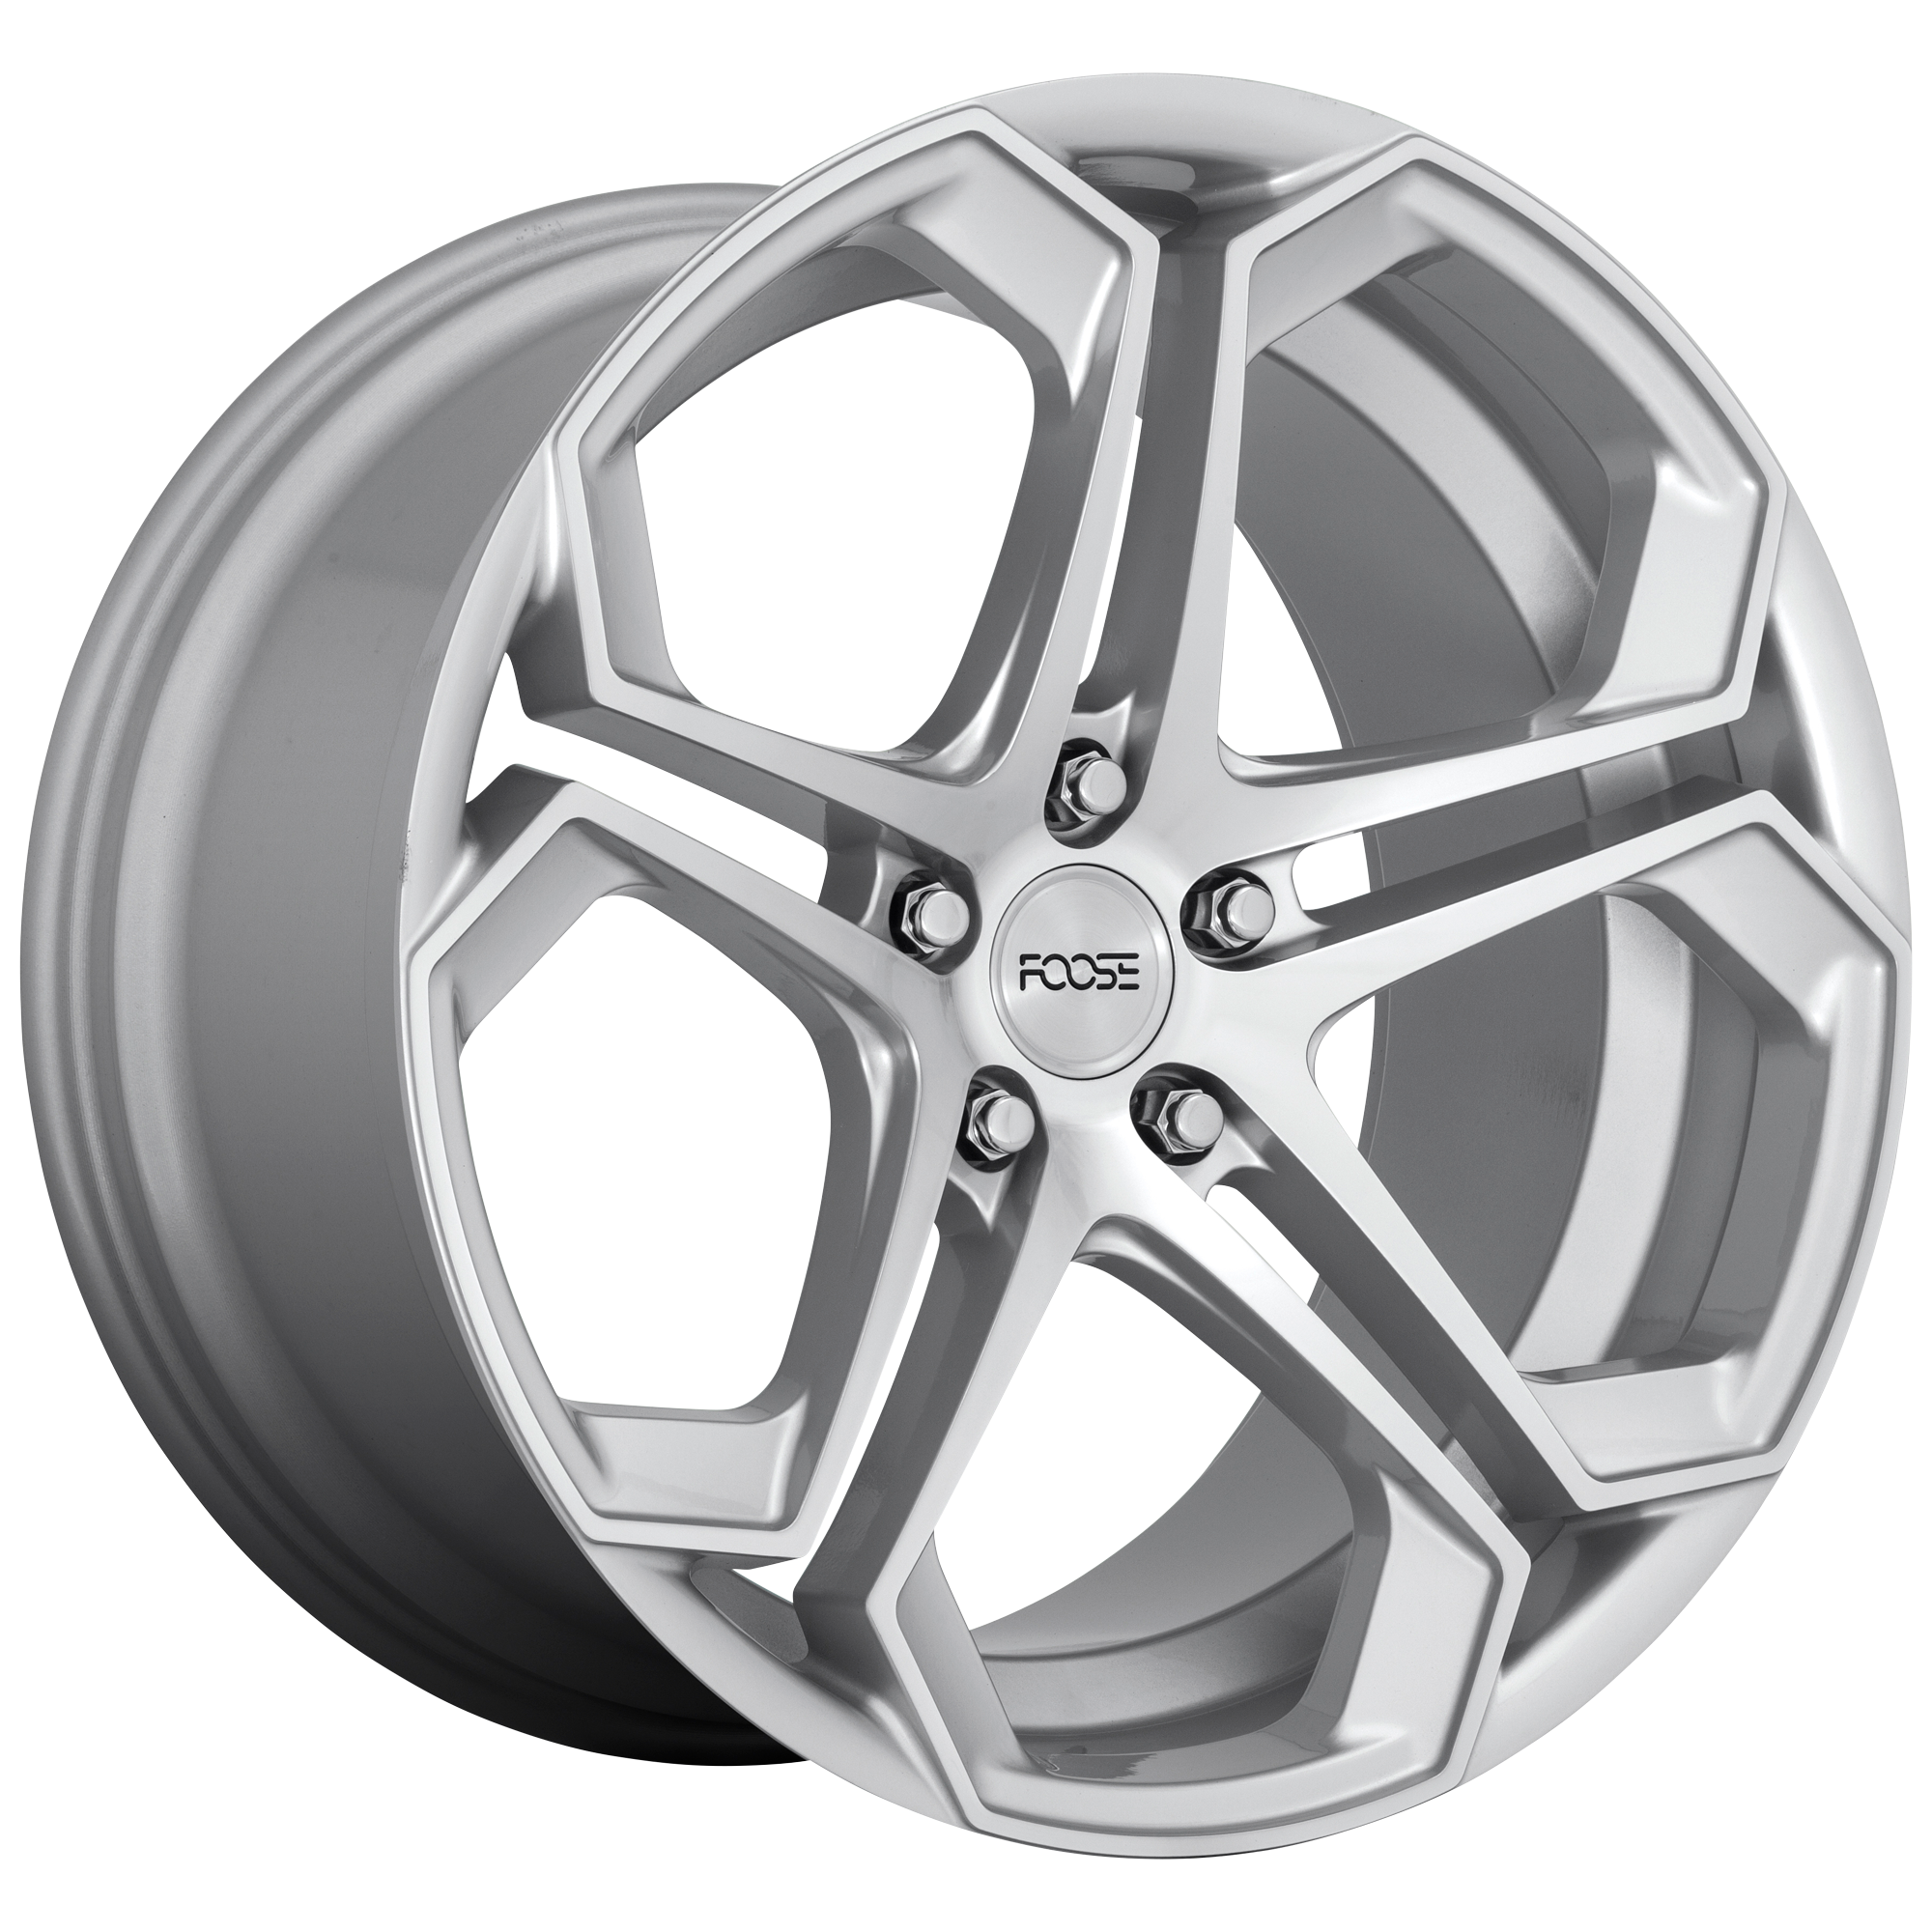 IMPALA 20x10.5 5x115.00 GLOSS SILVER MACHINED (20 mm) - Tires and Engine Performance